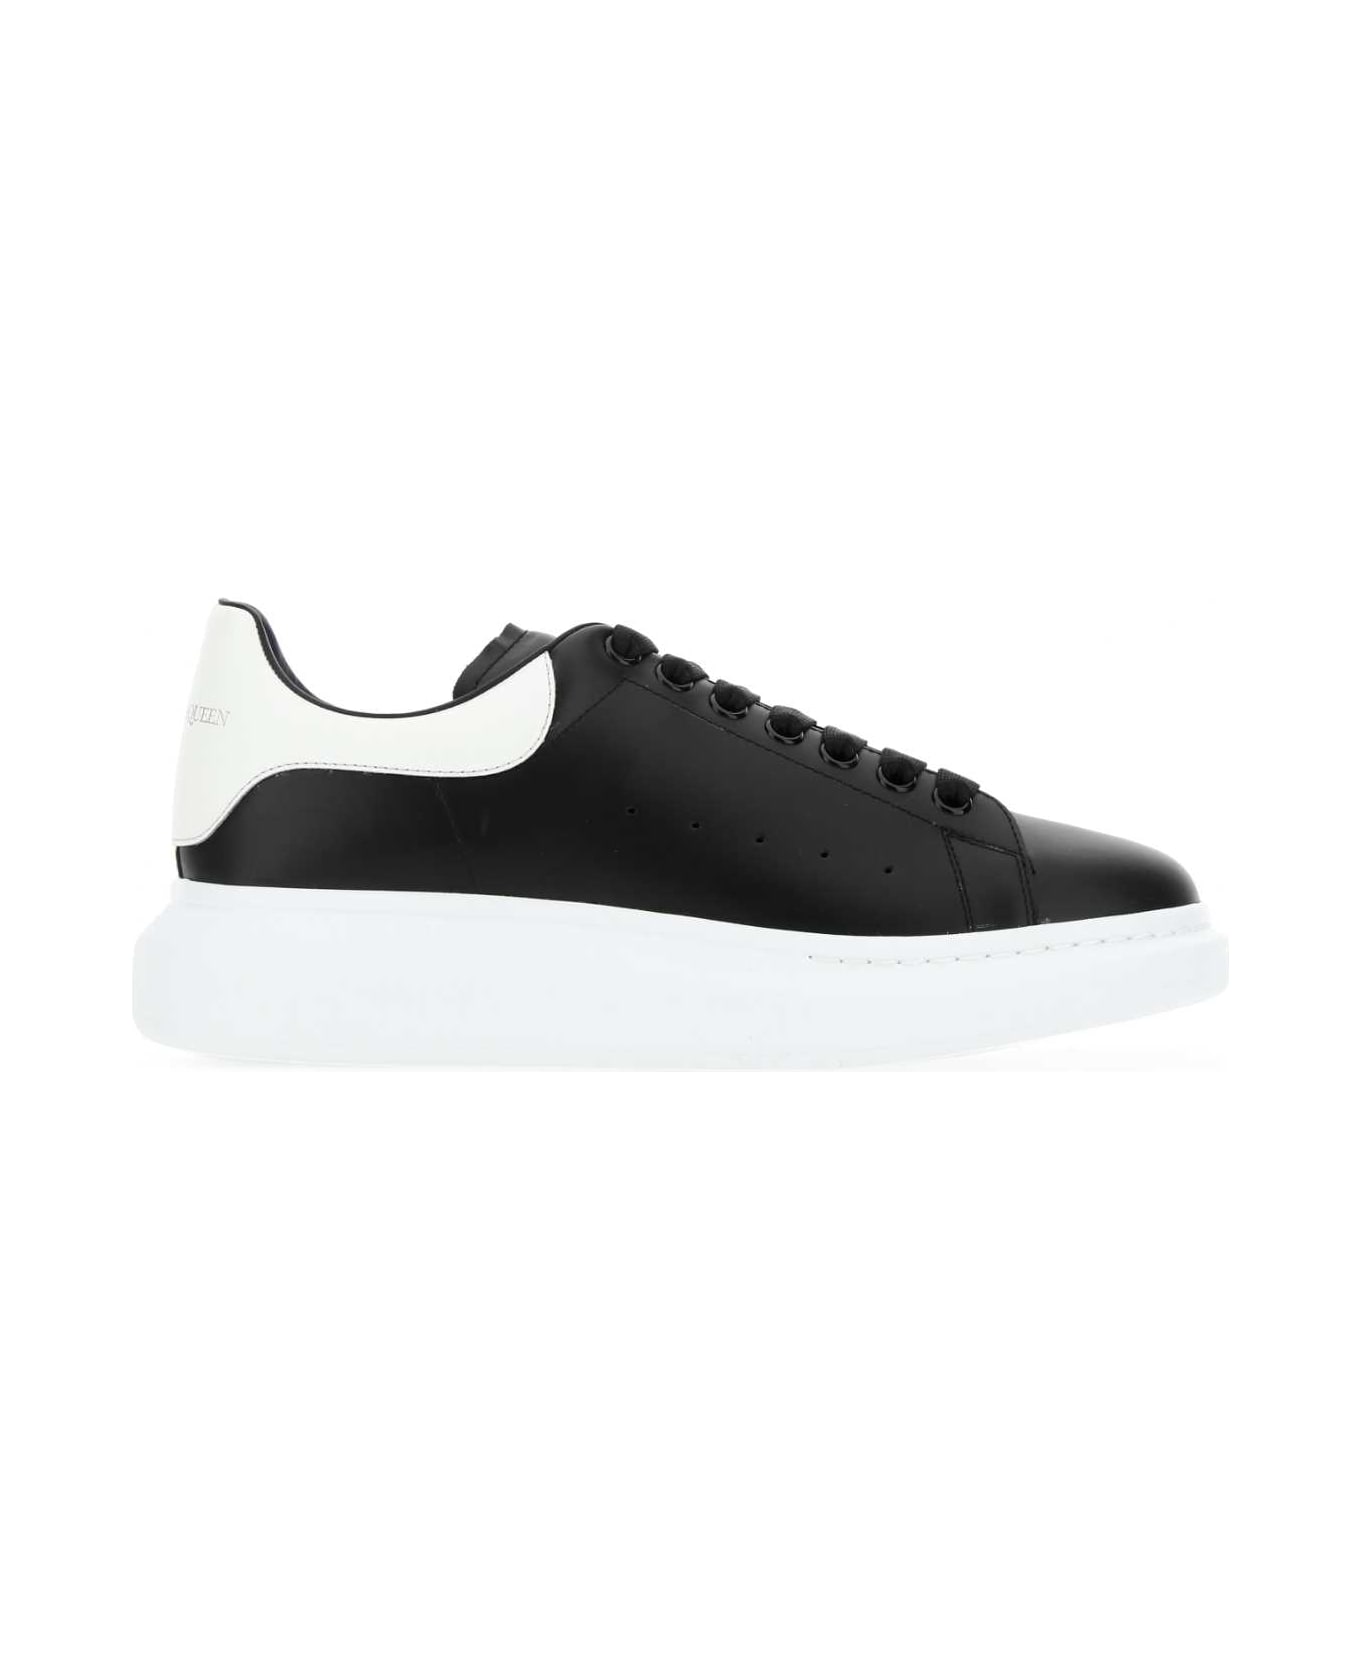 Alexander McQueen Black Leather Sneakers With White Leather Heel - 1070